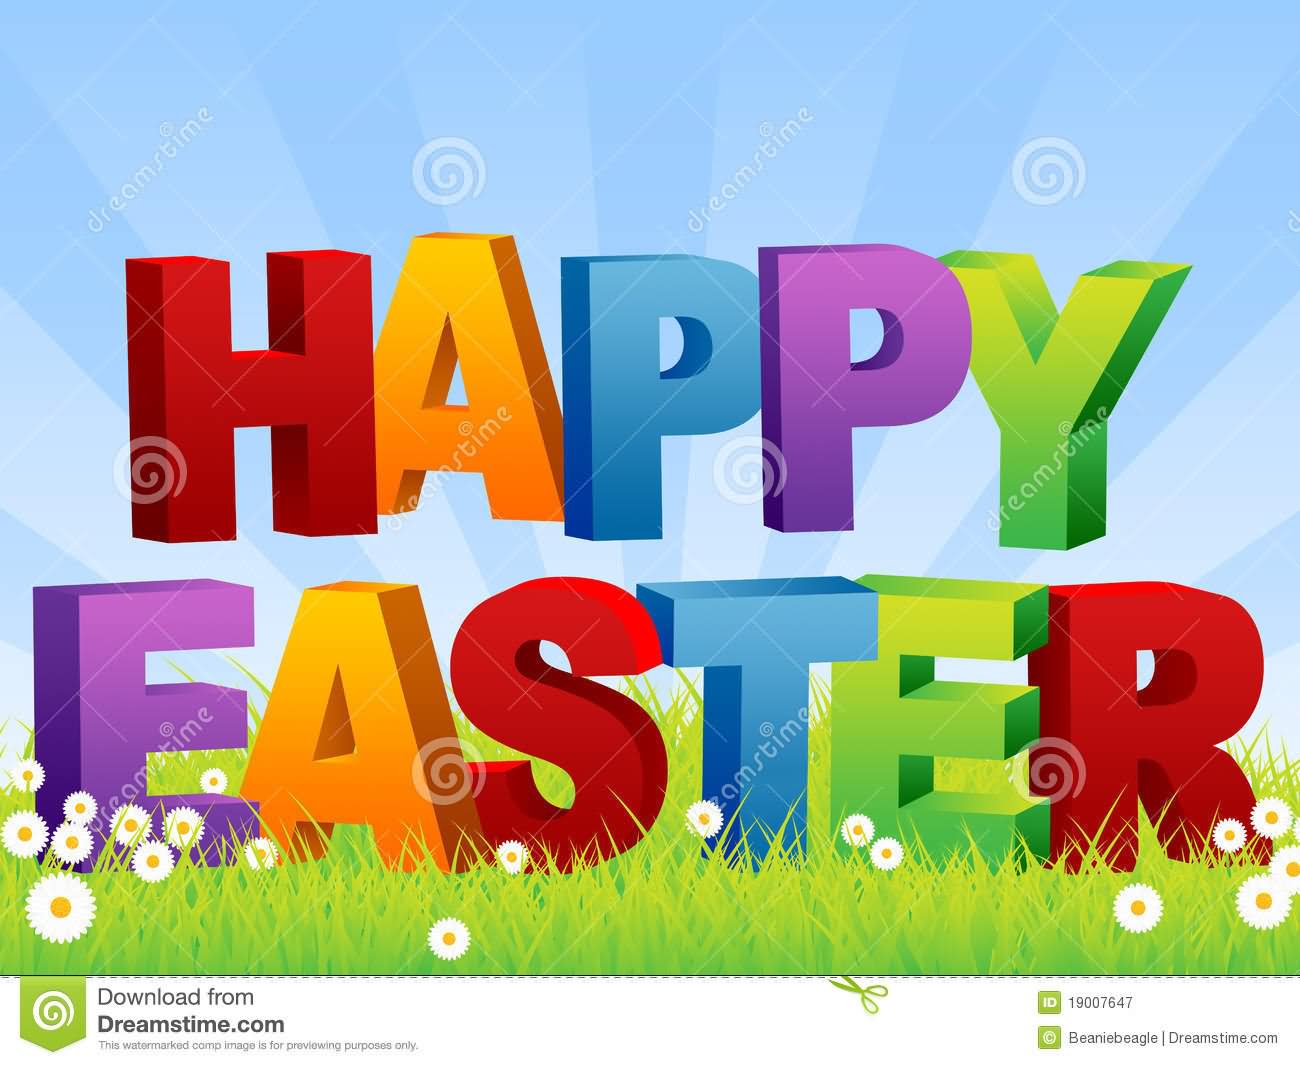 happy easter clipart religious - photo #35